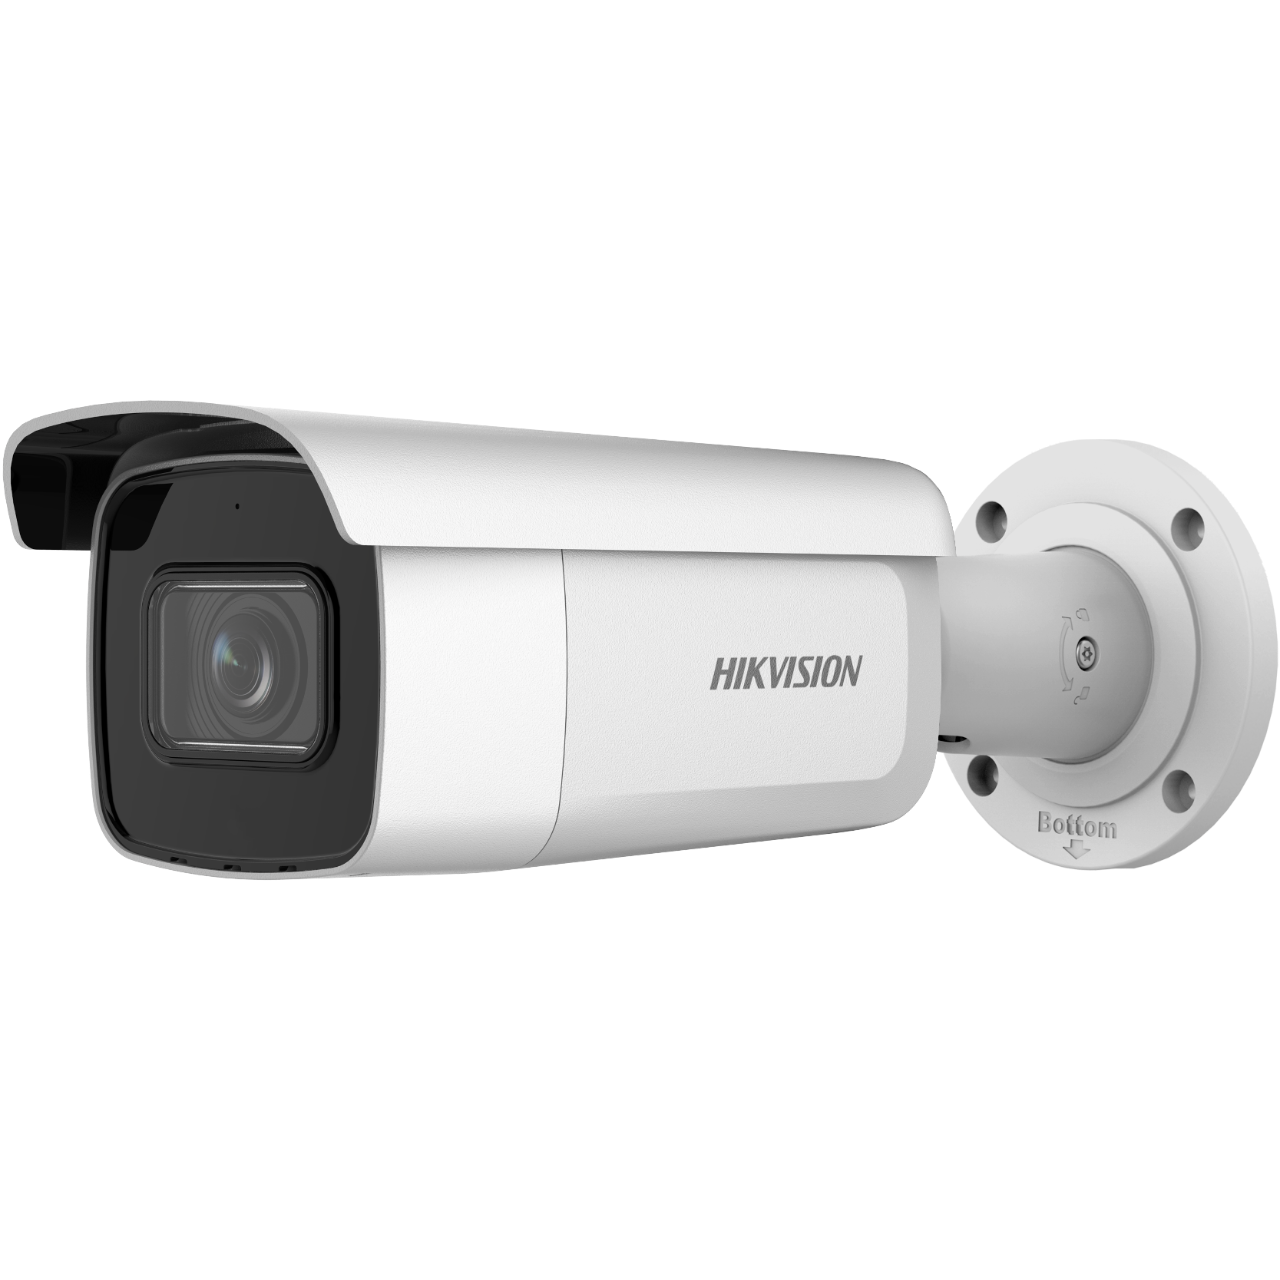 <p><span style="font-weight: bold; font-style: italic;">HIKVISION&nbsp; -&nbsp;</span><span style="color: inherit; font-family: inherit; font-size: 20px; font-weight: inherit; background-color: initial;">661.85лв.</span></p>